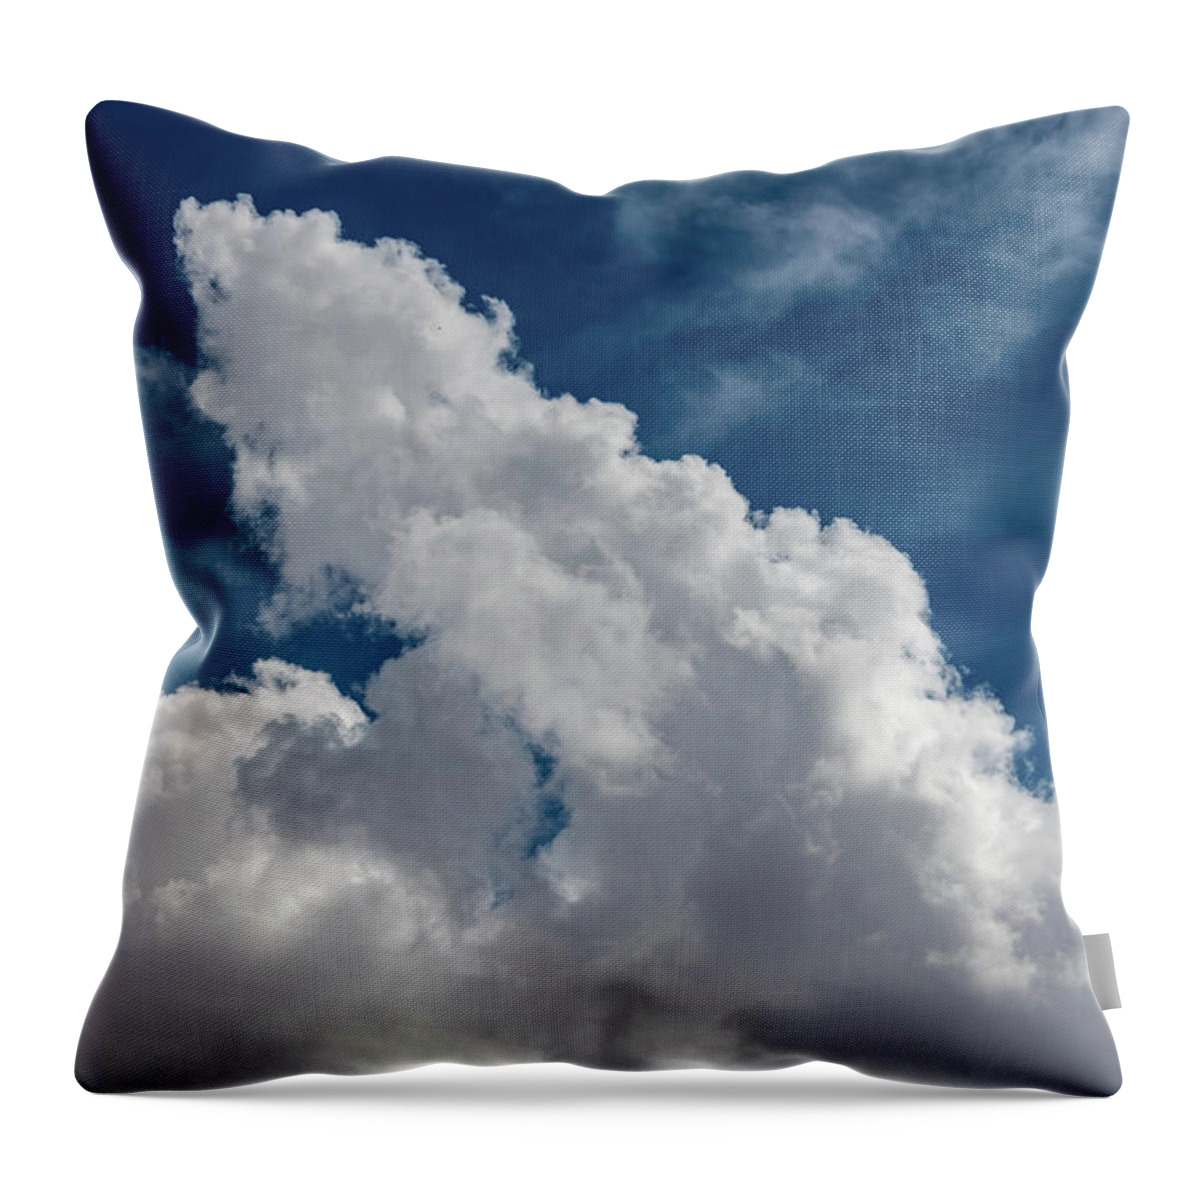 White Throw Pillow featuring the photograph Puffy White Clouds by Douglas Killourie